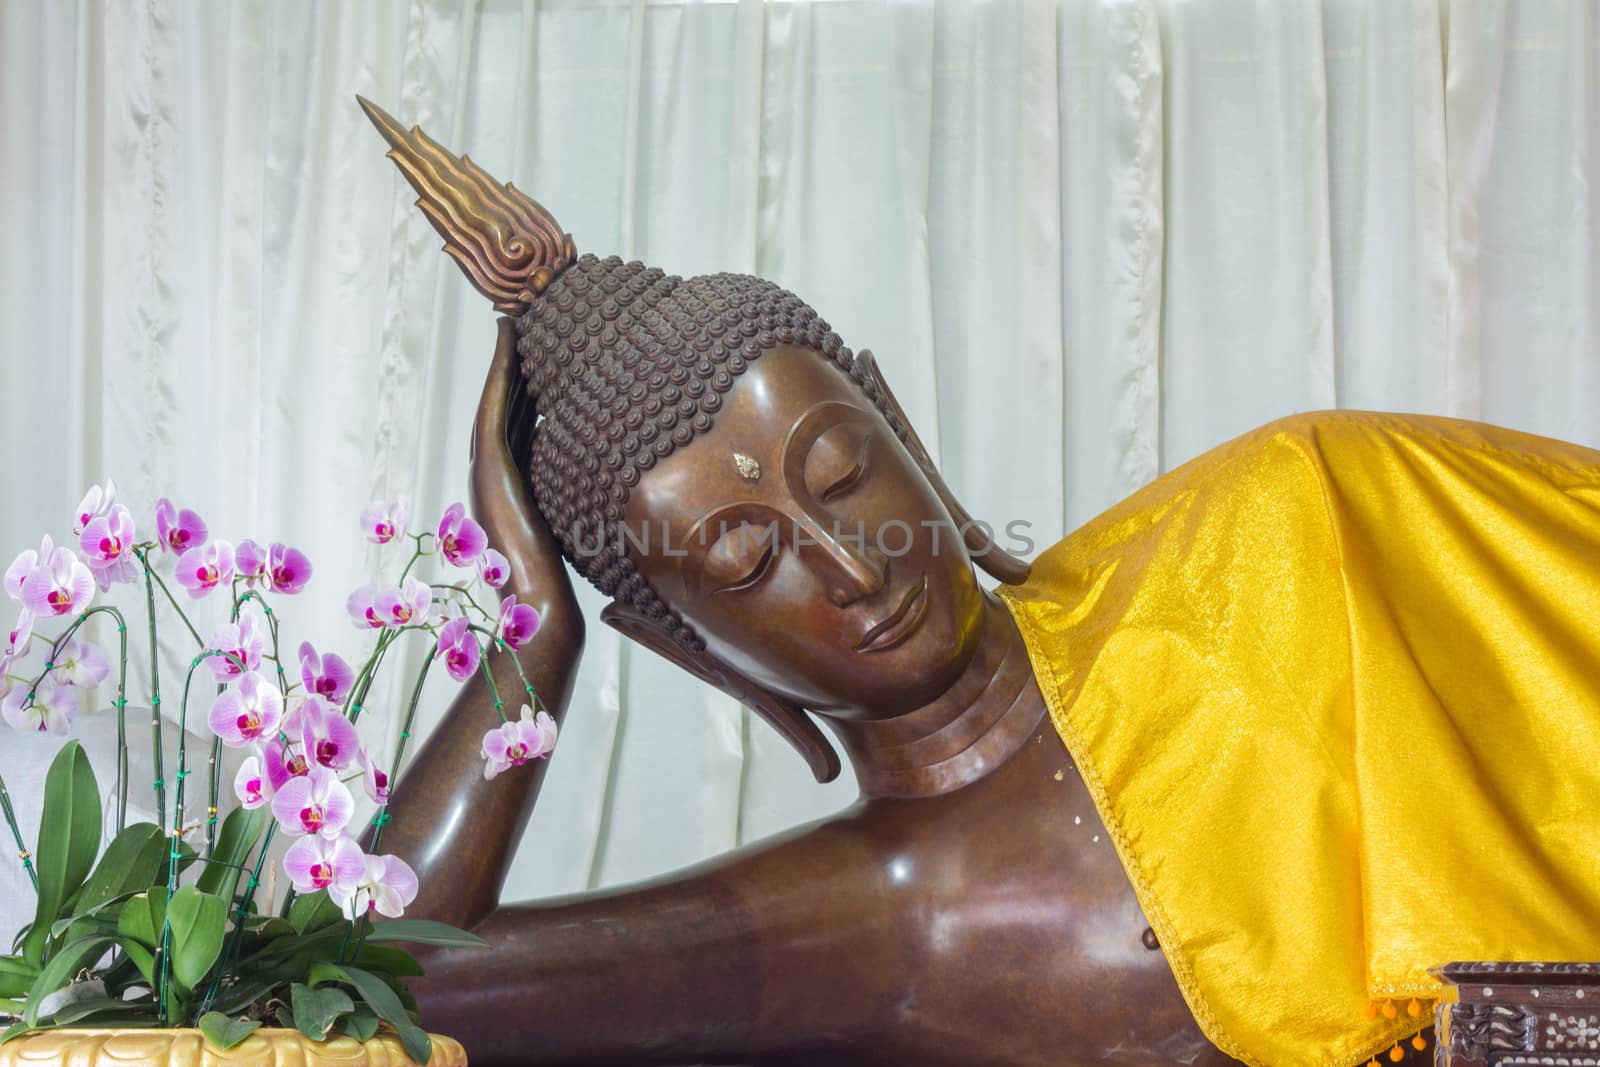 Sleeping Buddha Statue is in a temple in Thailand